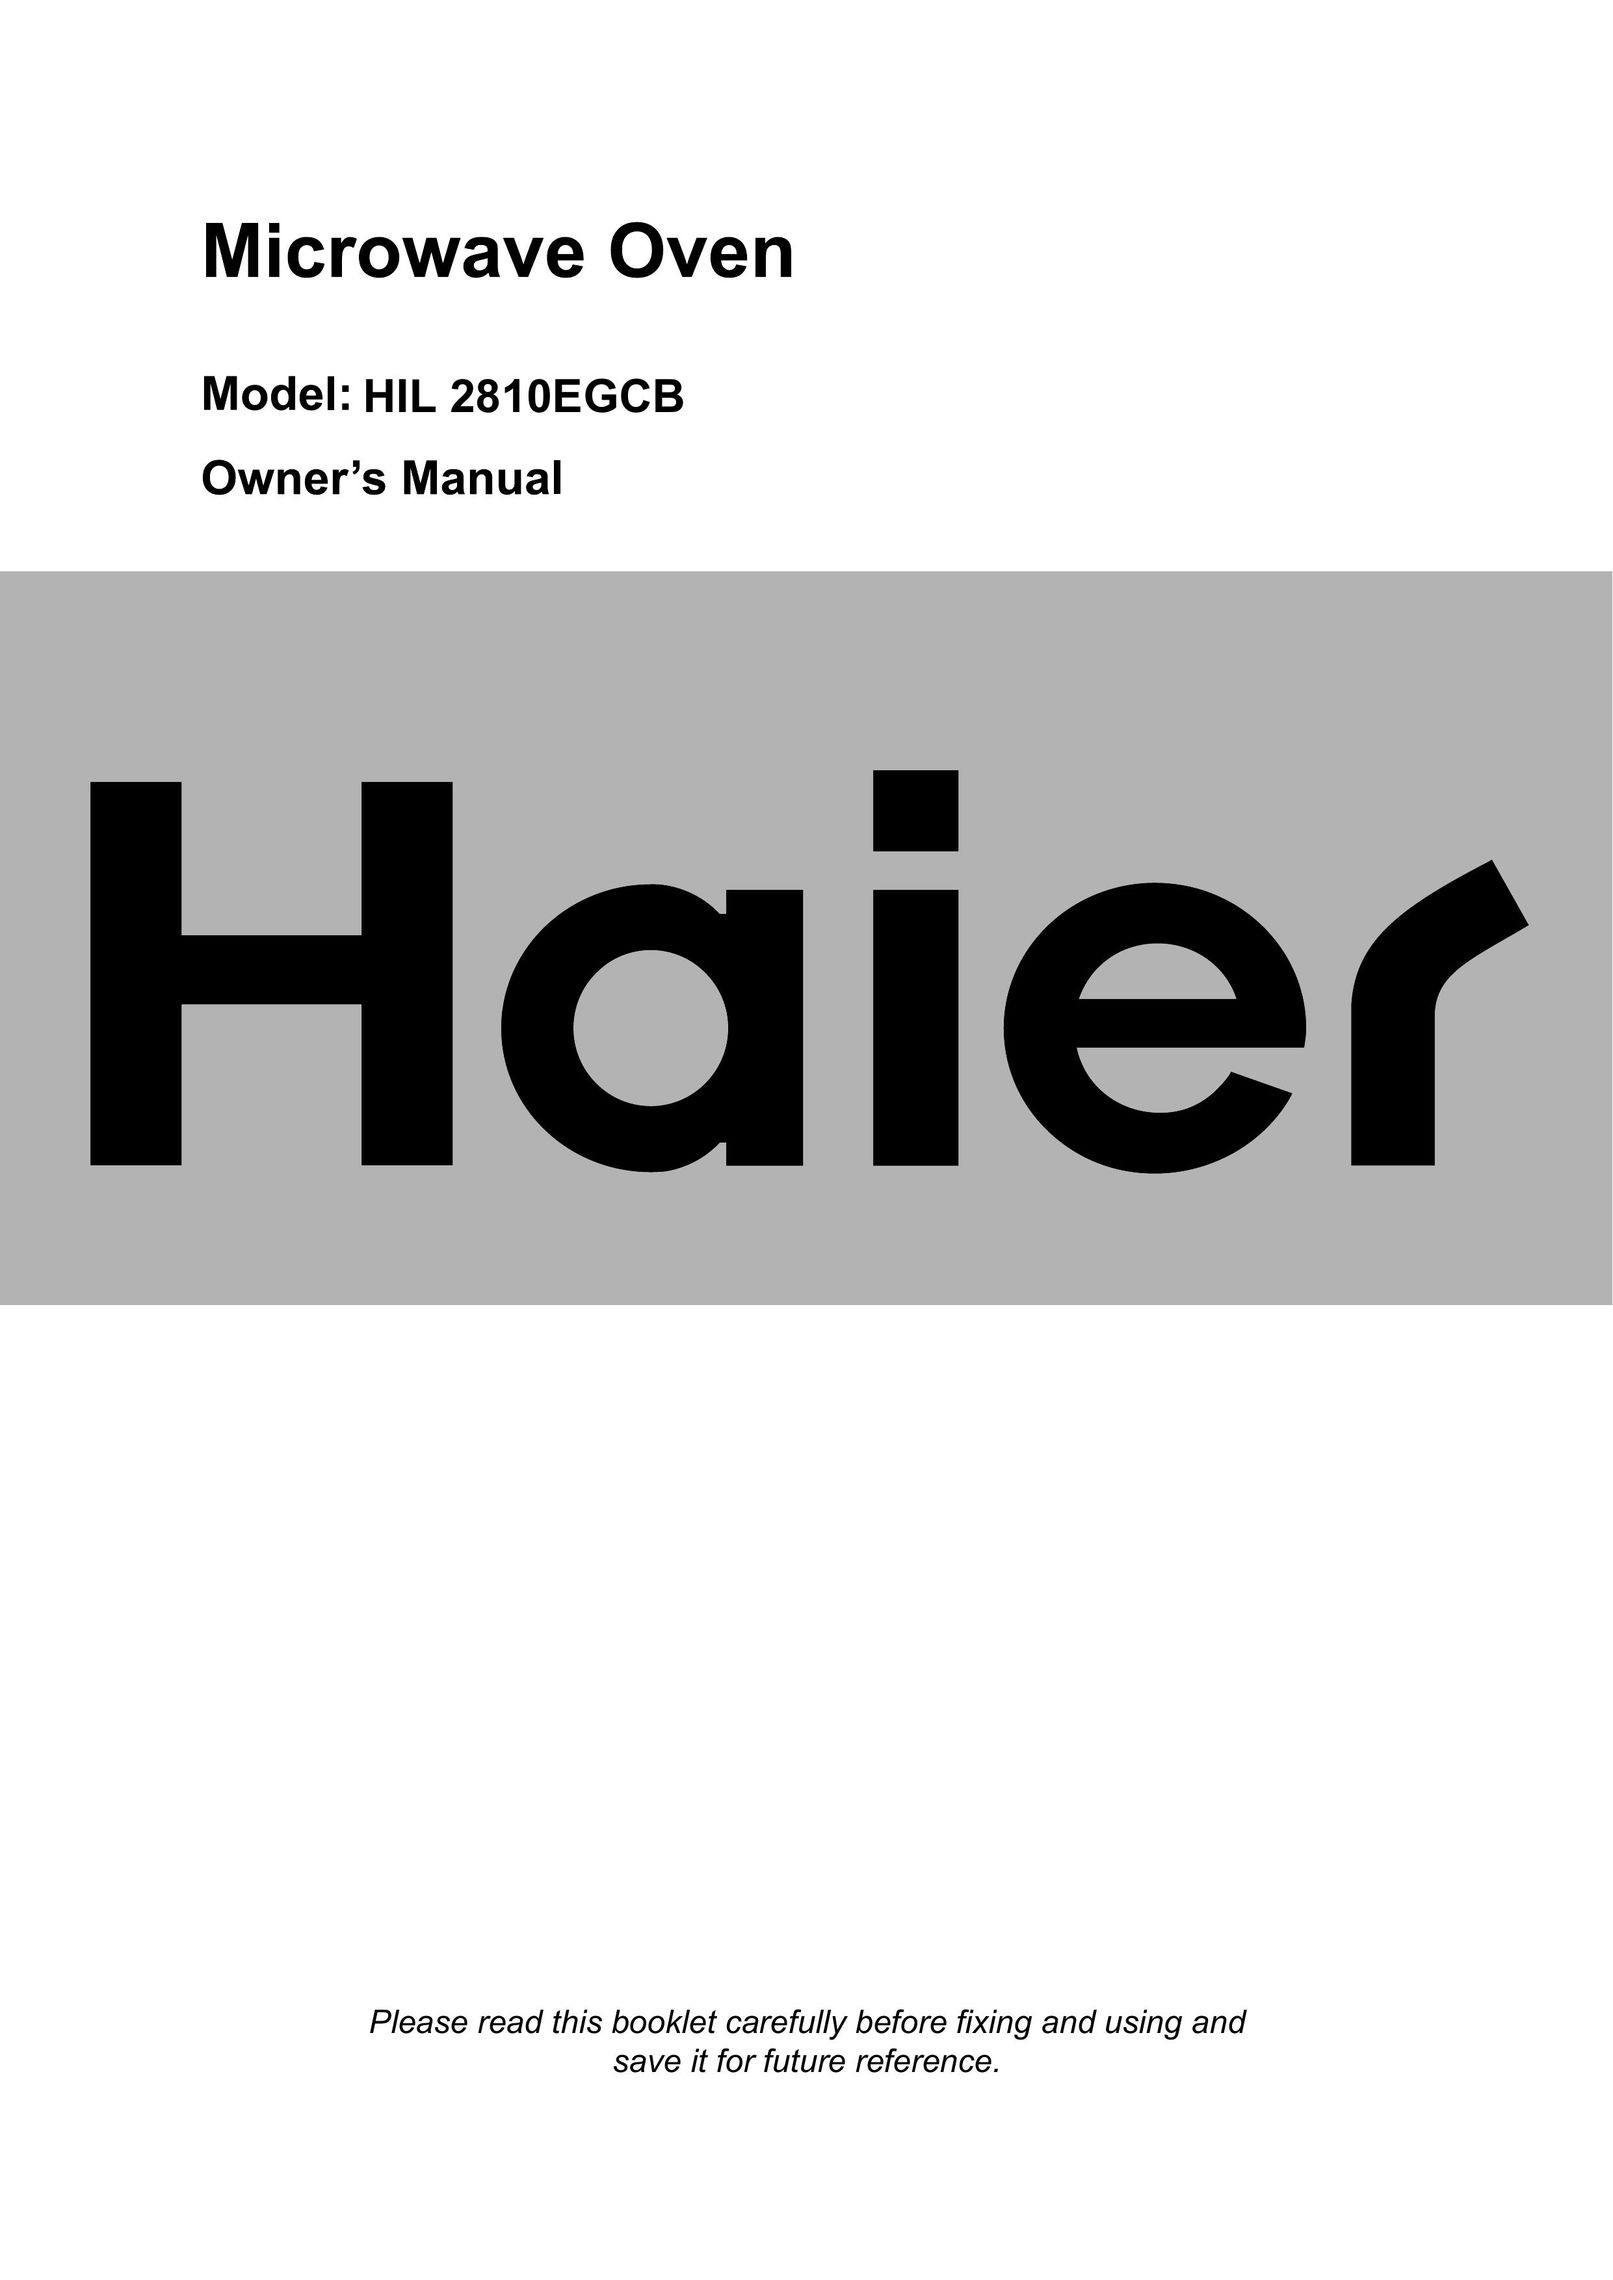 Haier HIL 2810EGCB Microwave Oven User Manual